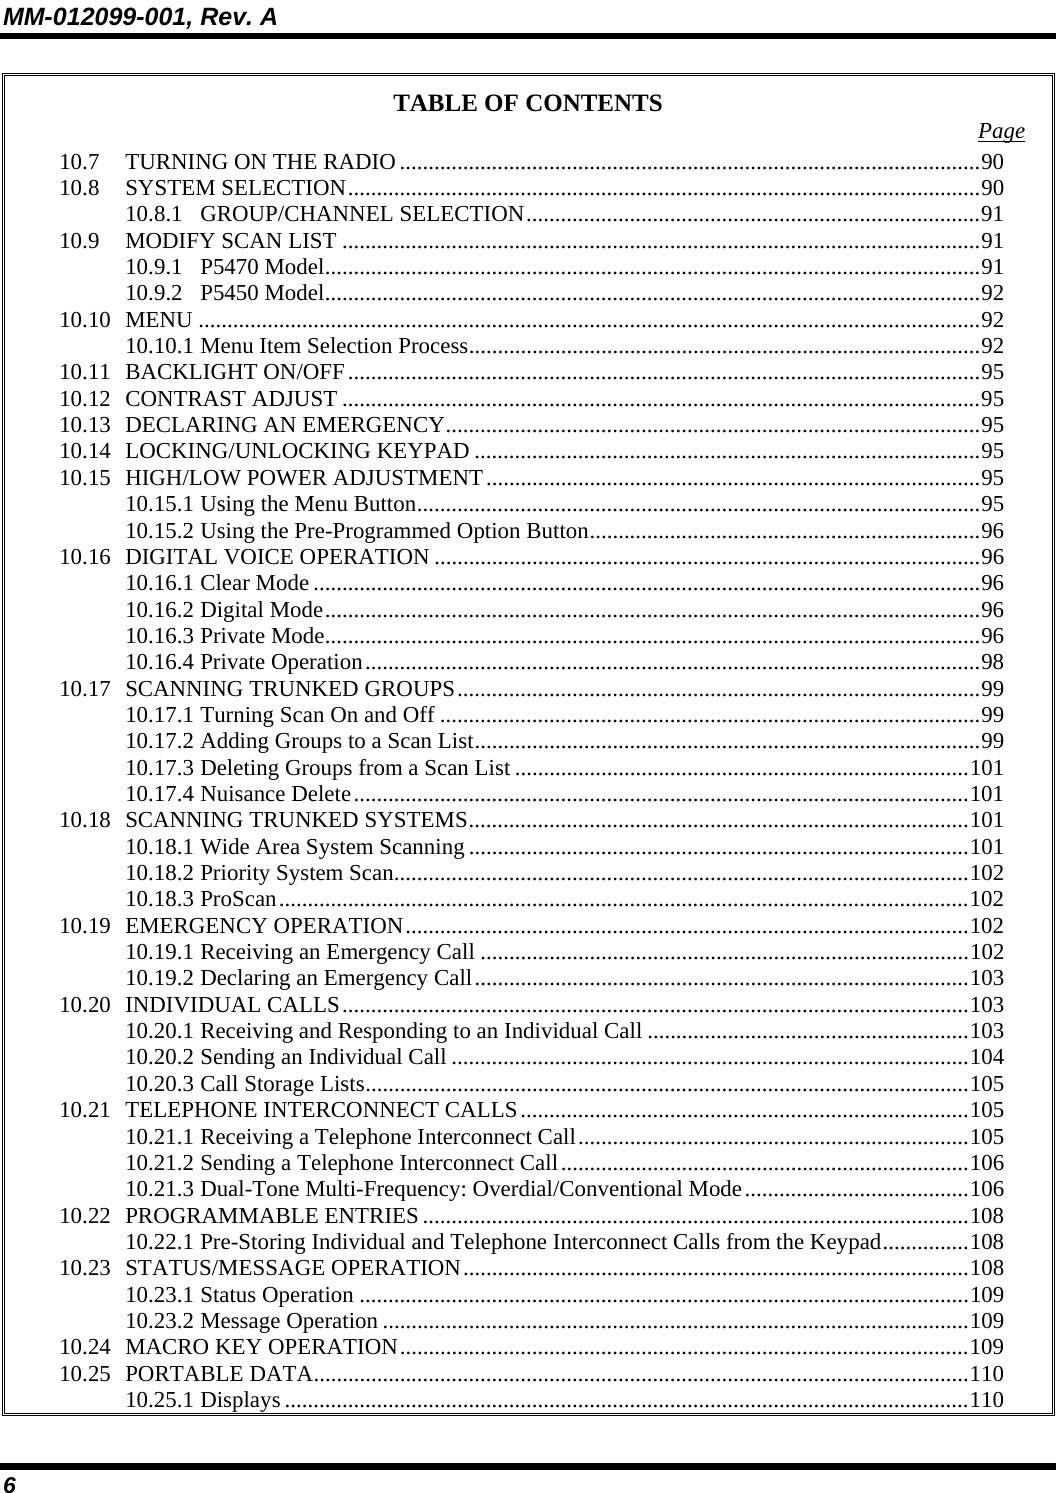 MM-012099-001, Rev. A 6 TABLE OF CONTENTS  Page 10.7 TURNING ON THE RADIO .....................................................................................................90 10.8 SYSTEM SELECTION..............................................................................................................90 10.8.1 GROUP/CHANNEL SELECTION...............................................................................91 10.9 MODIFY SCAN LIST ...............................................................................................................91 10.9.1 P5470 Model..................................................................................................................91 10.9.2 P5450 Model..................................................................................................................92 10.10 MENU ........................................................................................................................................92 10.10.1 Menu Item Selection Process.........................................................................................92 10.11 BACKLIGHT ON/OFF..............................................................................................................95 10.12 CONTRAST ADJUST ...............................................................................................................95 10.13 DECLARING AN EMERGENCY.............................................................................................95 10.14 LOCKING/UNLOCKING KEYPAD ........................................................................................95 10.15 HIGH/LOW POWER ADJUSTMENT......................................................................................95 10.15.1 Using the Menu Button..................................................................................................95 10.15.2 Using the Pre-Programmed Option Button....................................................................96 10.16 DIGITAL VOICE OPERATION ...............................................................................................96 10.16.1 Clear Mode ....................................................................................................................96 10.16.2 Digital Mode..................................................................................................................96 10.16.3 Private Mode..................................................................................................................96 10.16.4 Private Operation...........................................................................................................98 10.17 SCANNING TRUNKED GROUPS...........................................................................................99 10.17.1 Turning Scan On and Off ..............................................................................................99 10.17.2 Adding Groups to a Scan List........................................................................................99 10.17.3 Deleting Groups from a Scan List ...............................................................................101 10.17.4 Nuisance Delete...........................................................................................................101 10.18 SCANNING TRUNKED SYSTEMS.......................................................................................101 10.18.1 Wide Area System Scanning .......................................................................................101 10.18.2 Priority System Scan....................................................................................................102 10.18.3 ProScan........................................................................................................................102 10.19 EMERGENCY OPERATION..................................................................................................102 10.19.1 Receiving an Emergency Call .....................................................................................102 10.19.2 Declaring an Emergency Call......................................................................................103 10.20 INDIVIDUAL CALLS.............................................................................................................103 10.20.1 Receiving and Responding to an Individual Call ........................................................103 10.20.2 Sending an Individual Call ..........................................................................................104 10.20.3 Call Storage Lists.........................................................................................................105 10.21 TELEPHONE INTERCONNECT CALLS..............................................................................105 10.21.1 Receiving a Telephone Interconnect Call....................................................................105 10.21.2 Sending a Telephone Interconnect Call.......................................................................106 10.21.3 Dual-Tone Multi-Frequency: Overdial/Conventional Mode.......................................106 10.22 PROGRAMMABLE ENTRIES...............................................................................................108 10.22.1 Pre-Storing Individual and Telephone Interconnect Calls from the Keypad...............108 10.23 STATUS/MESSAGE OPERATION........................................................................................108 10.23.1 Status Operation ..........................................................................................................109 10.23.2 Message Operation ......................................................................................................109 10.24 MACRO KEY OPERATION...................................................................................................109 10.25 PORTABLE DATA..................................................................................................................110 10.25.1 Displays .......................................................................................................................110 